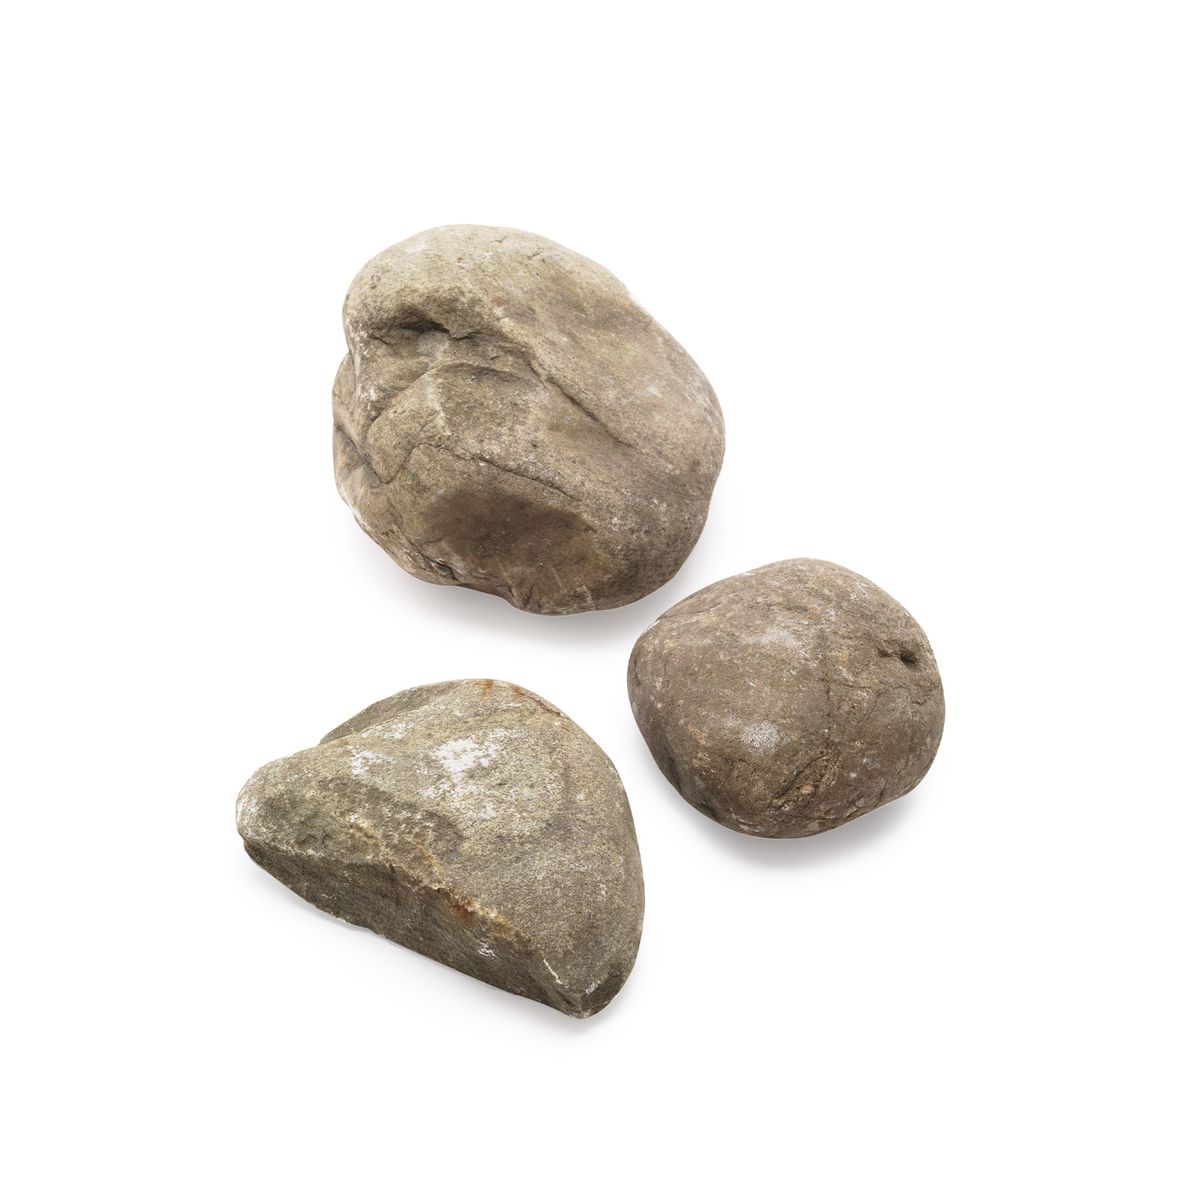 Stones for barbecue grill